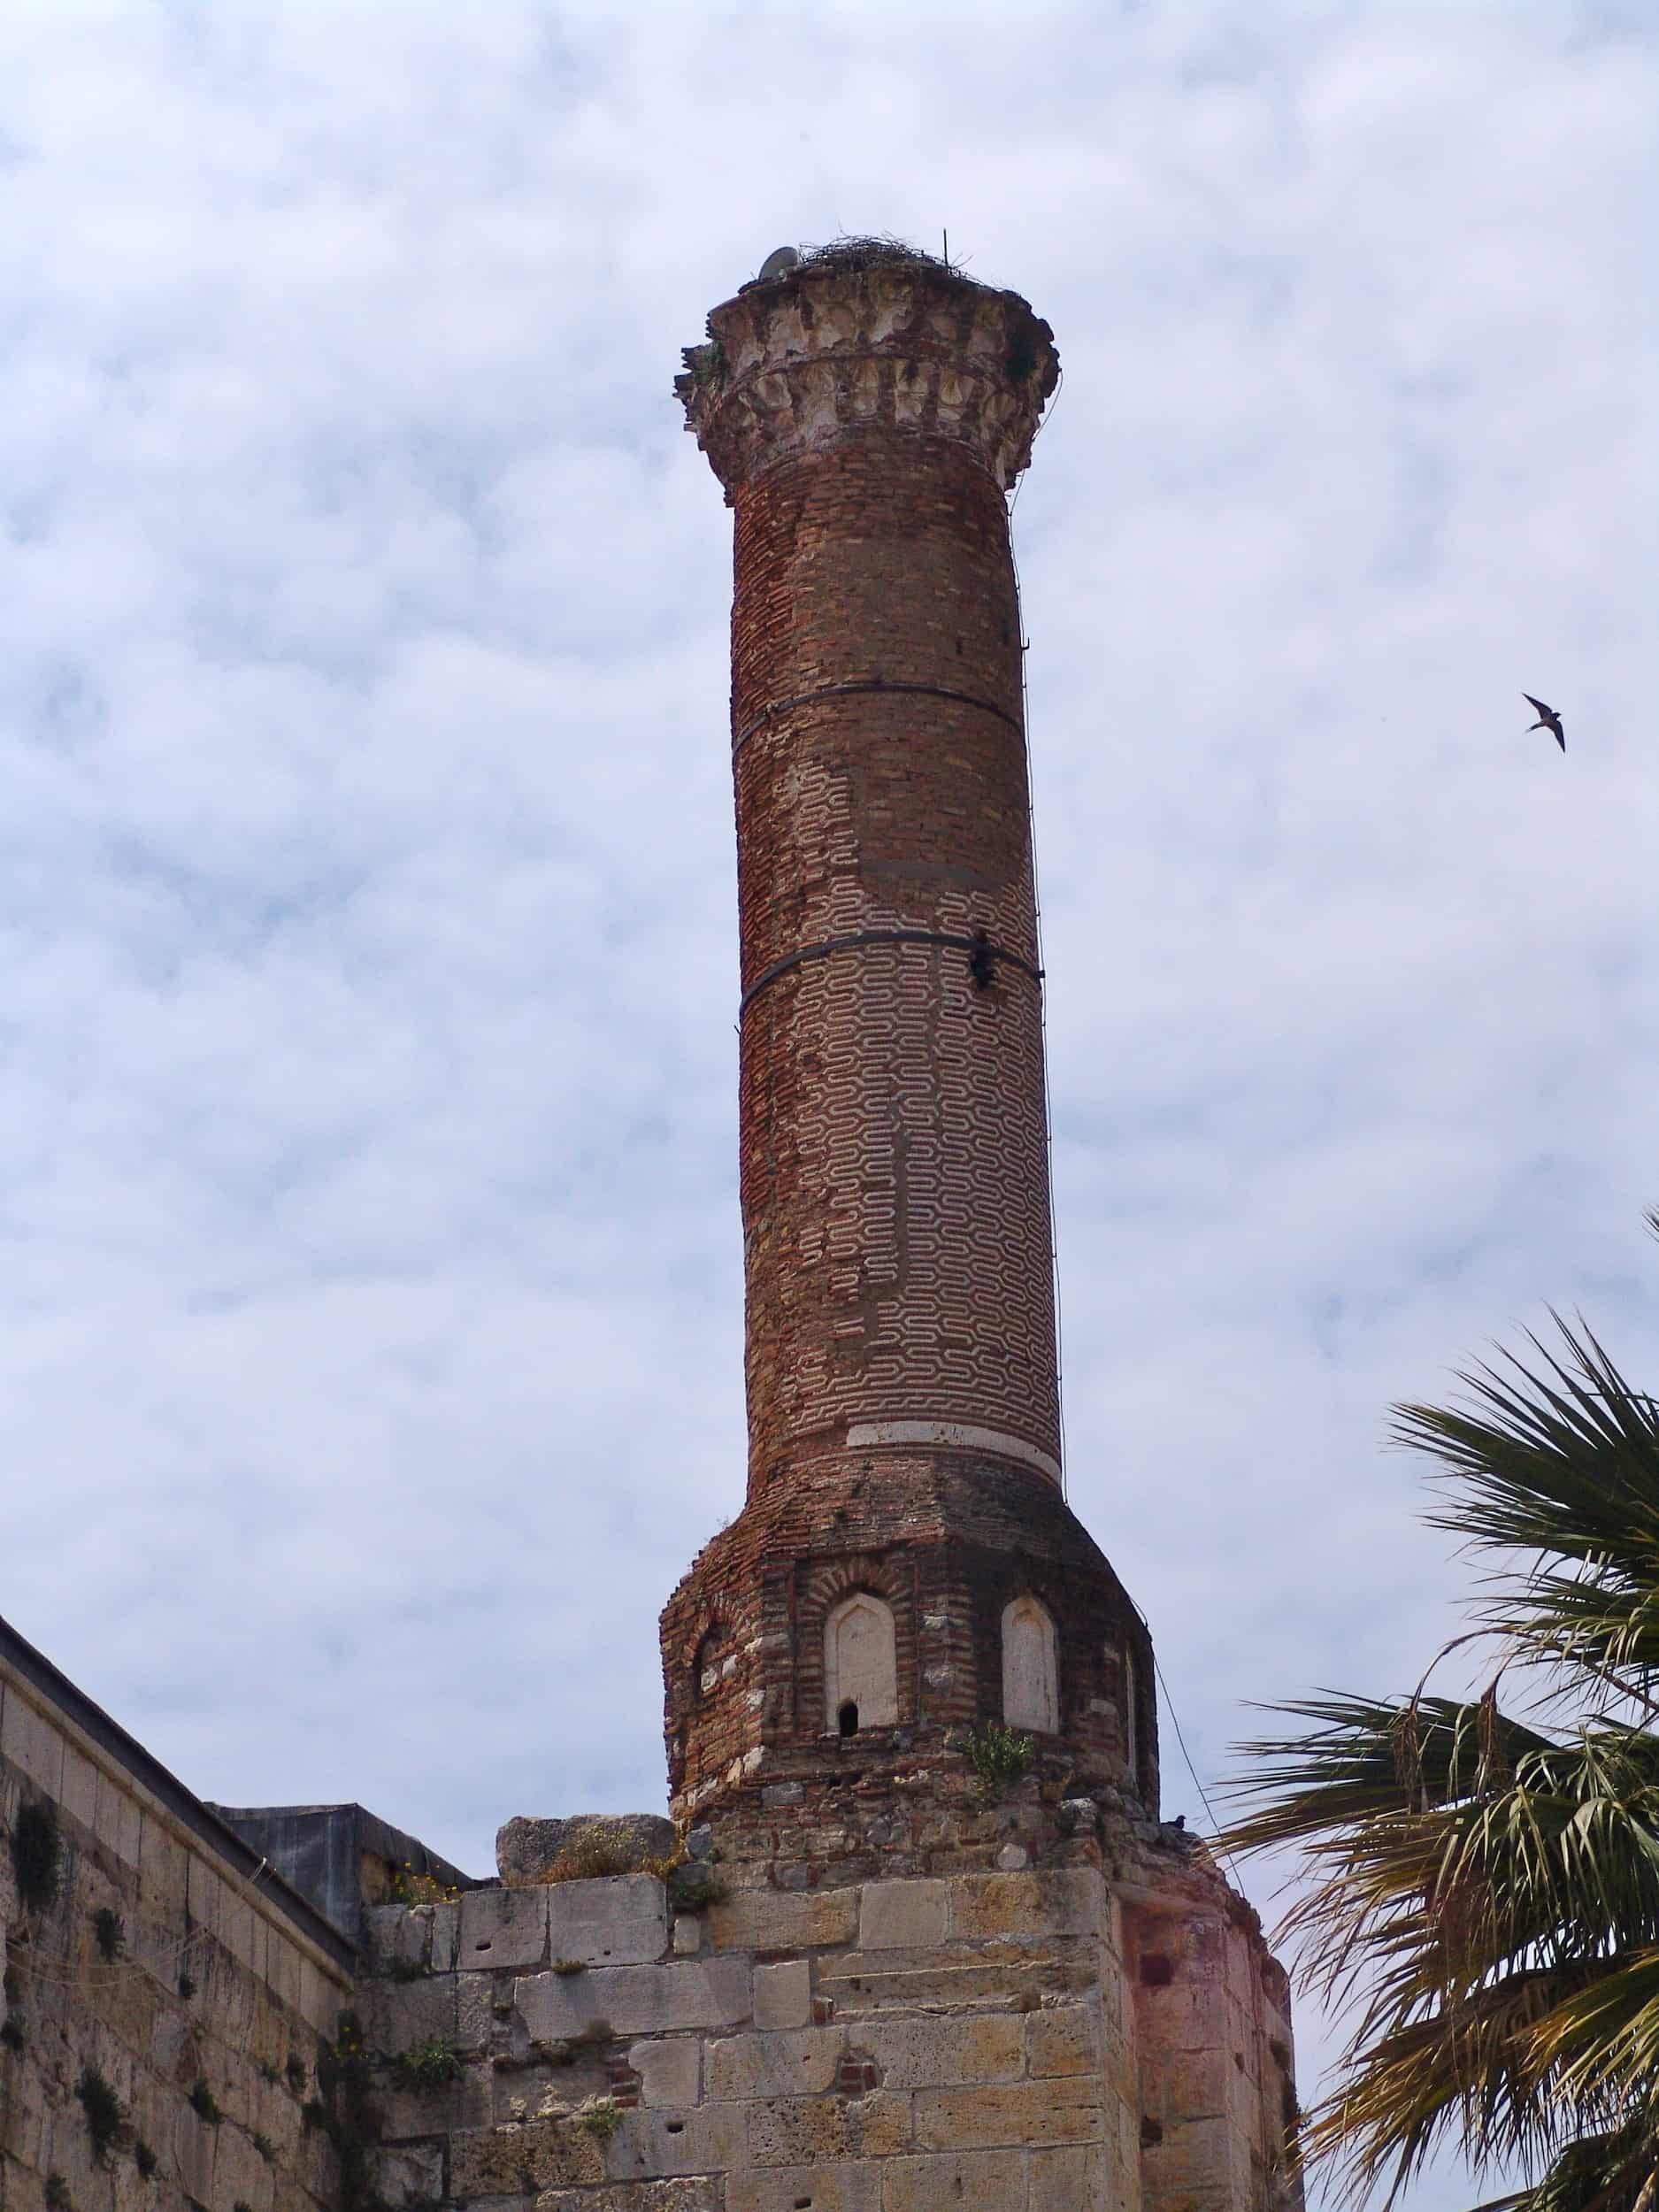 Brick minaret on the west side of the Isa Bey Mosque